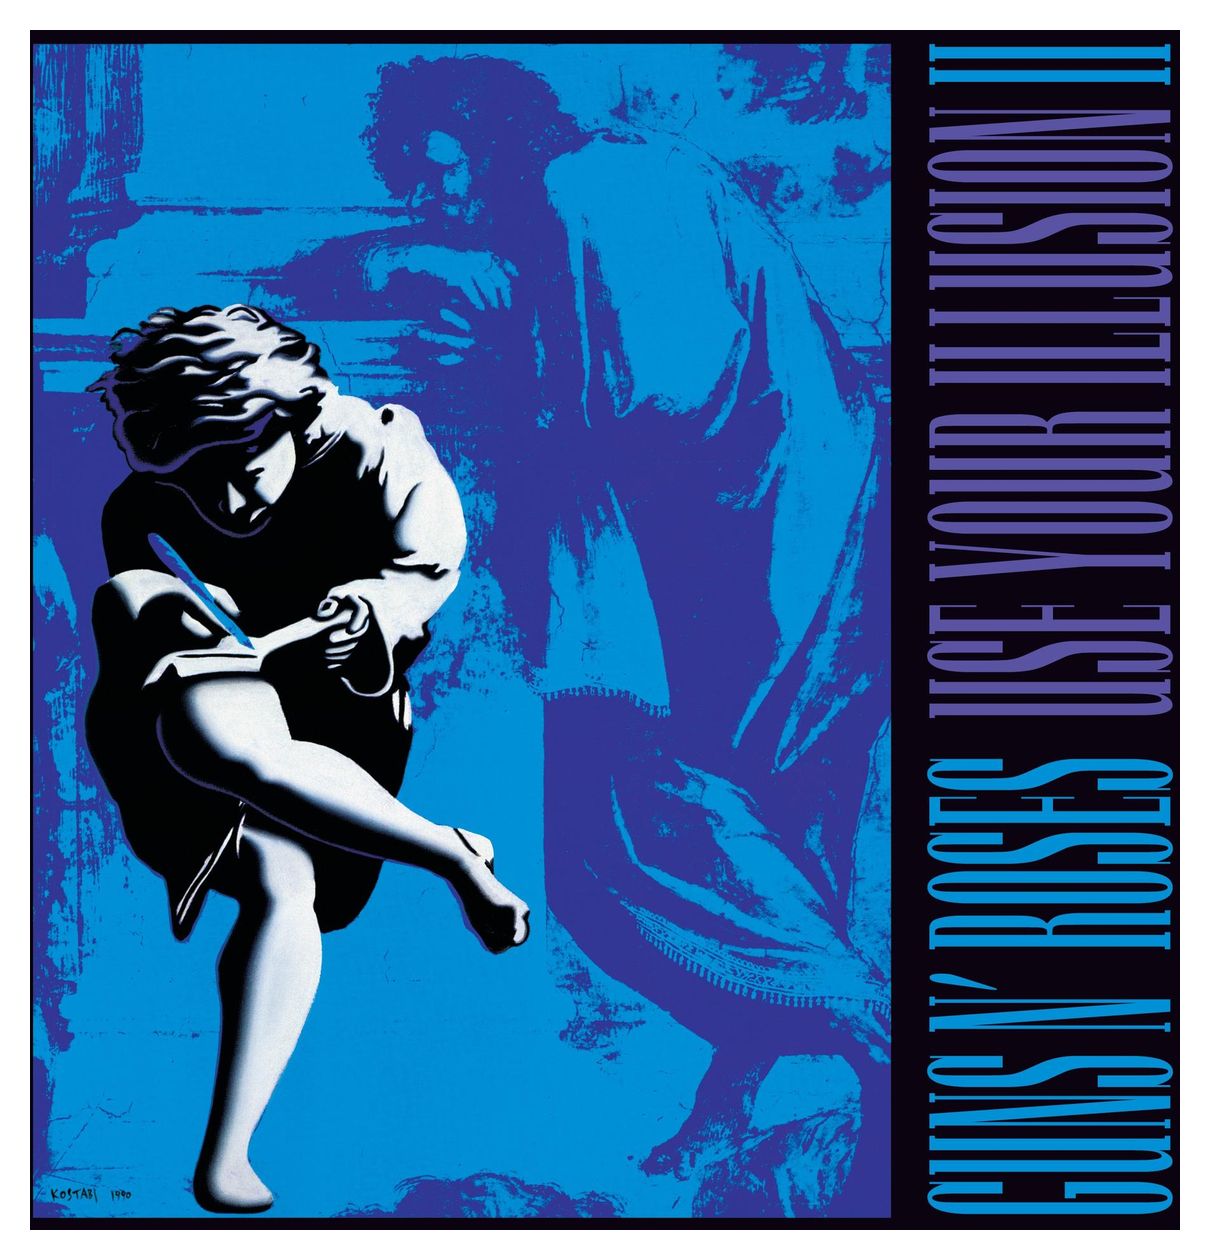 Guns N' Roses - Use Your Illusion II (Super Deluxe 2CD) 